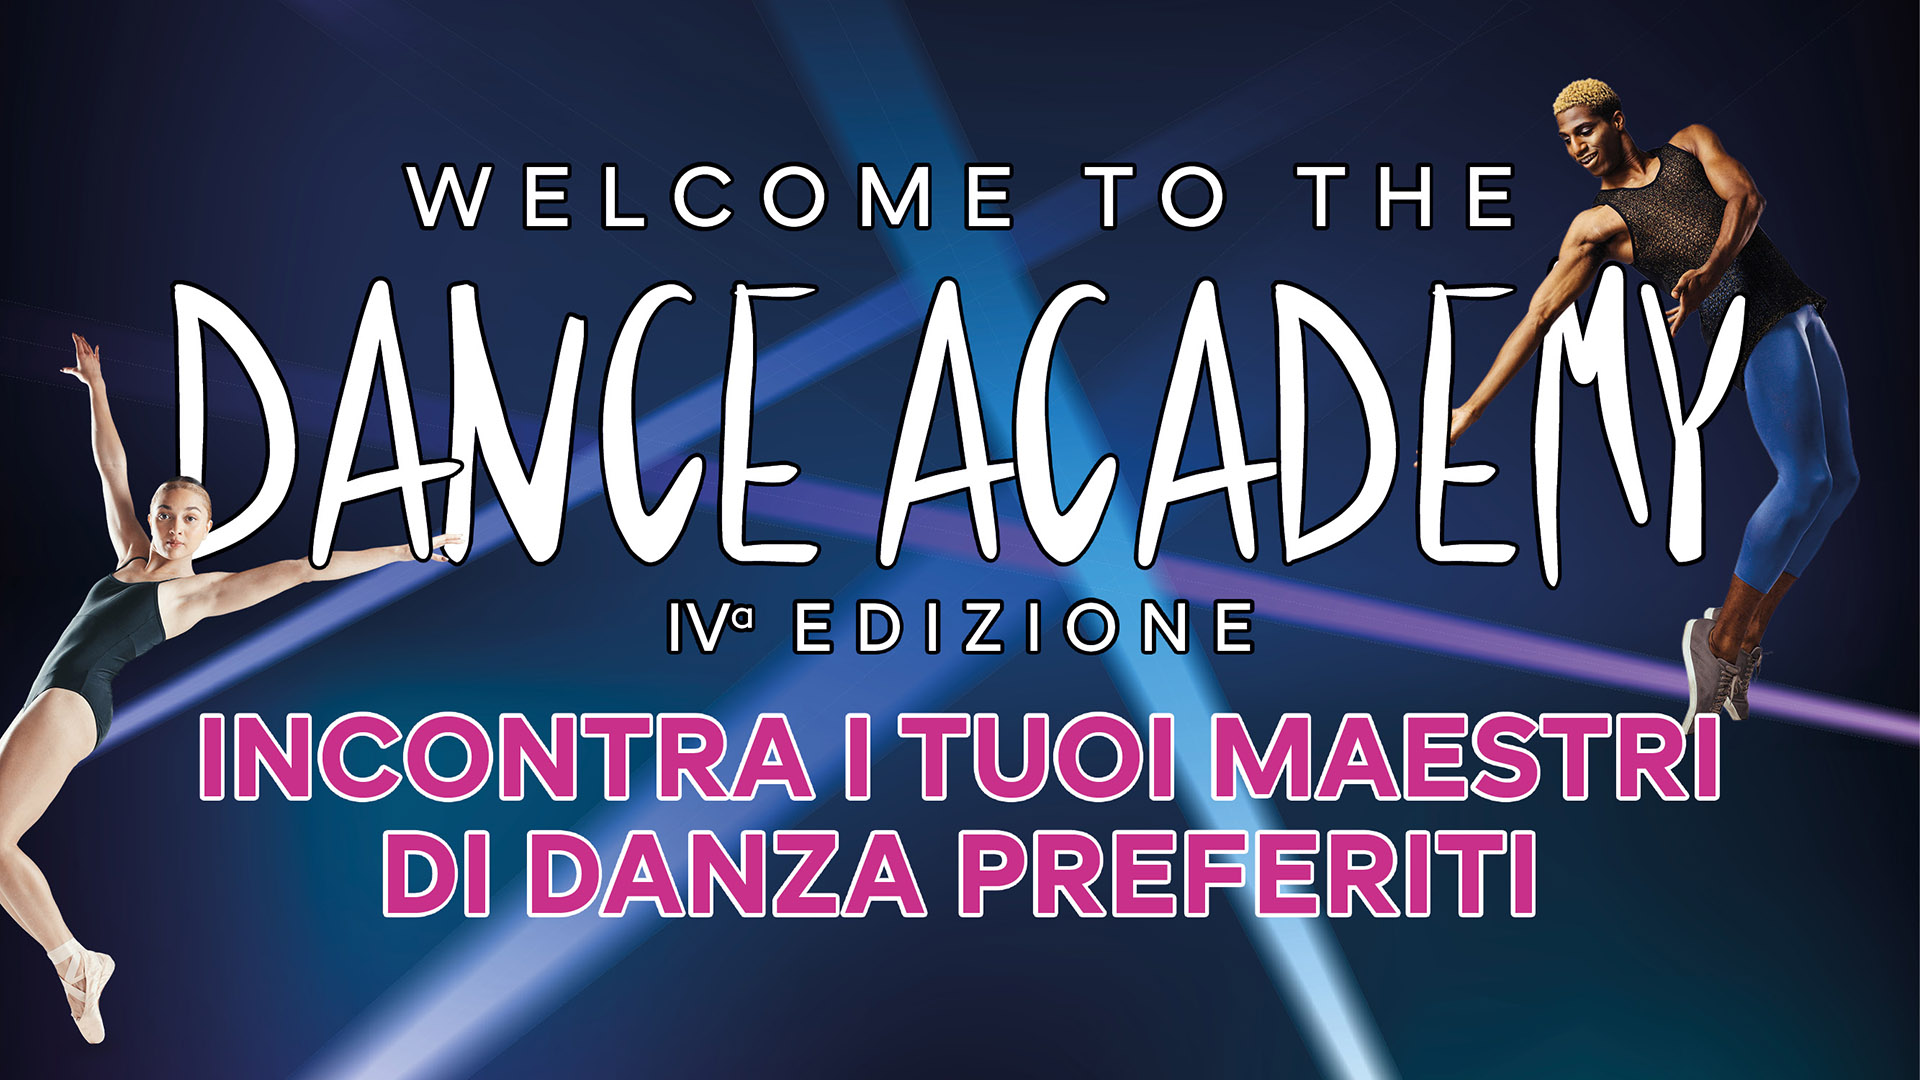 Welcome to the Dance Academy